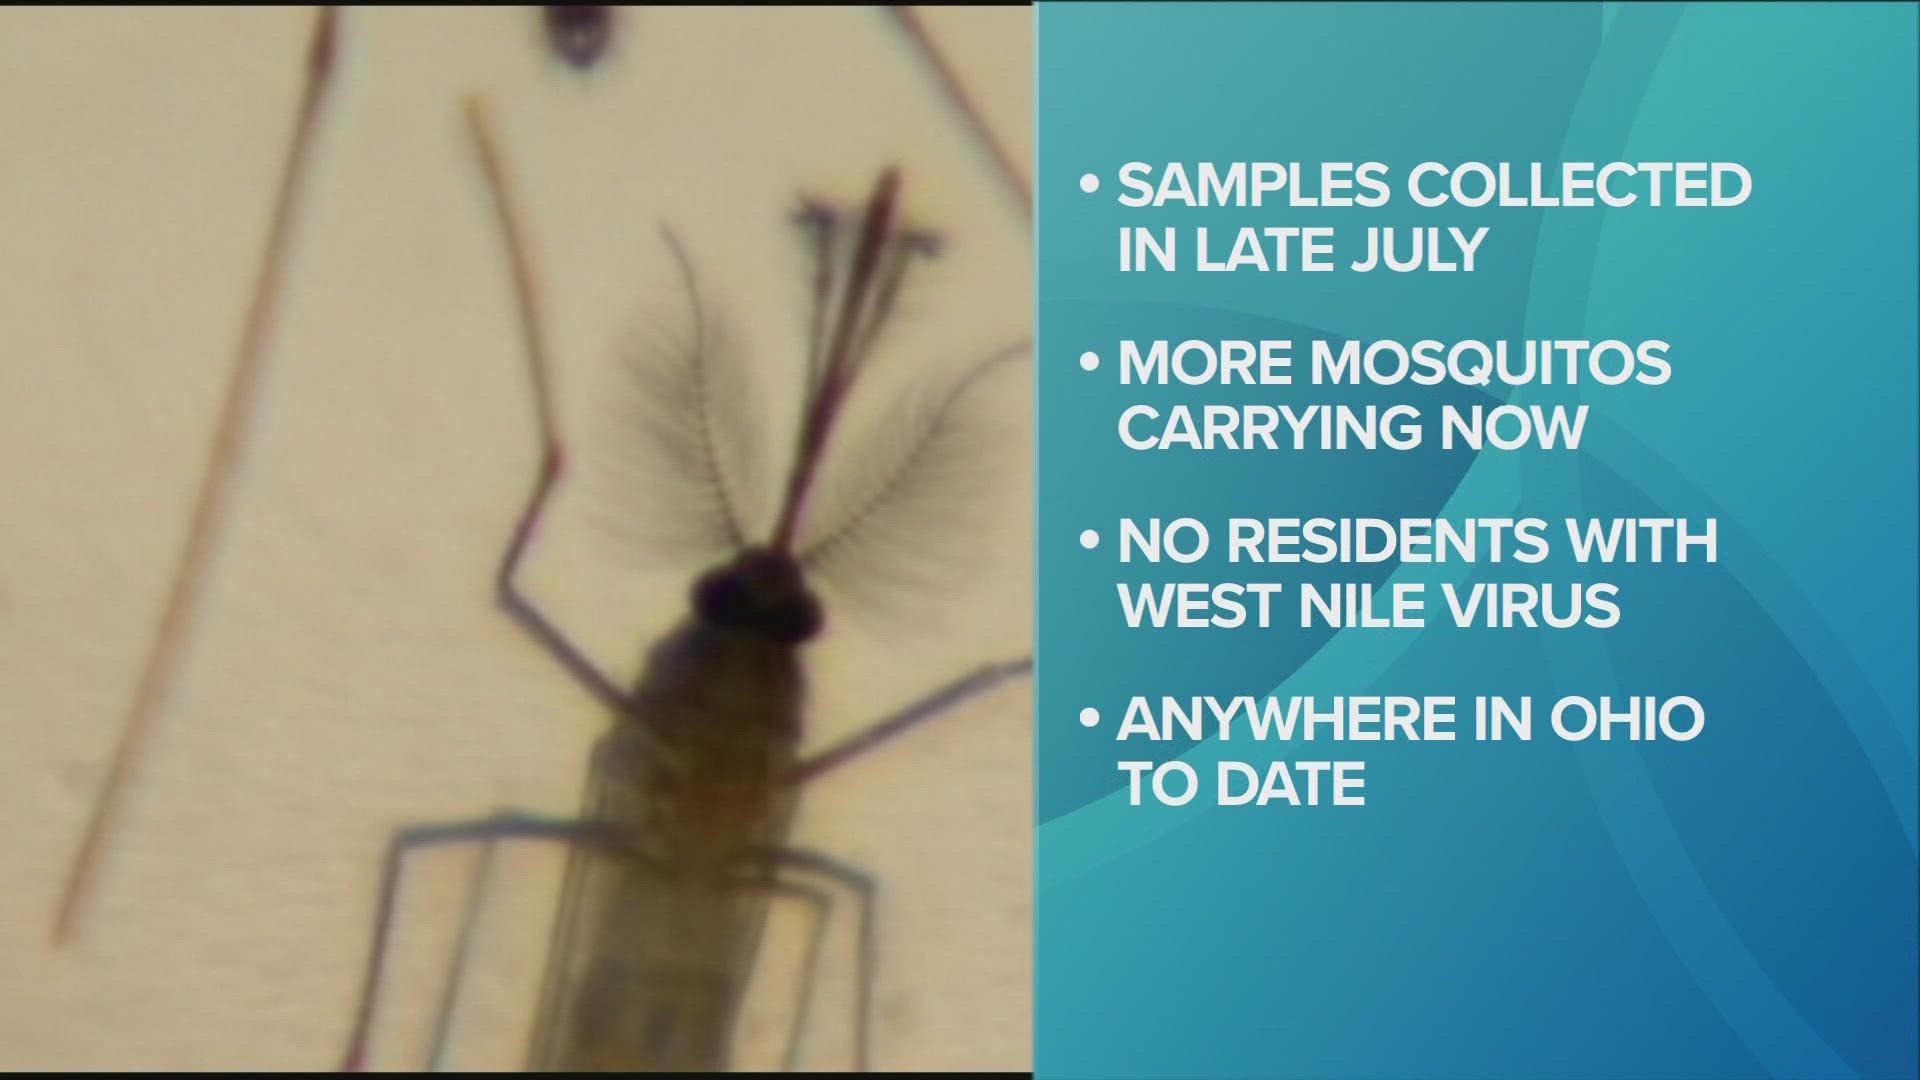 Three pools of mosquitos carrying West Nile Virus have been discovered in Lake County.